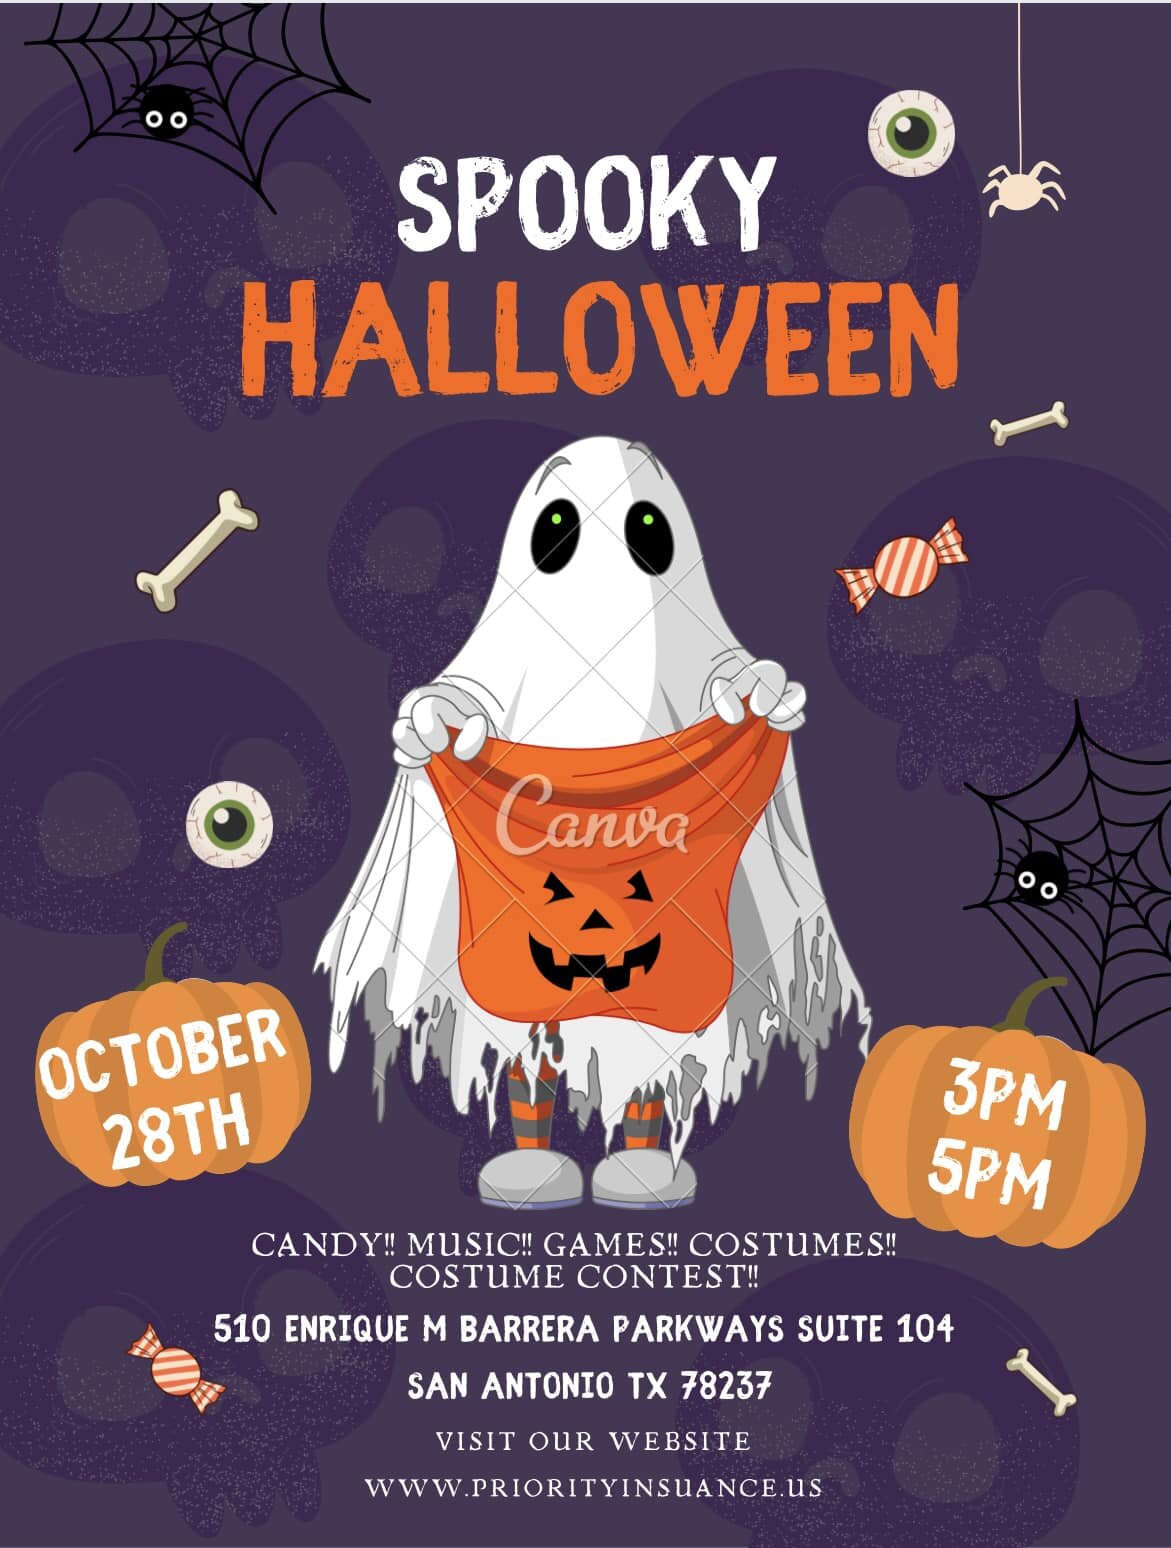 Come and have a spooky time with the priority girls‼️🎃👻🧛&zwj;♂️🎃👻🧛&zwj;♂️🎃👻🧛&zwj;♂️🎃👻🧛&zwj;♂️

📍 510 Enrique M Barrera Parkway San Antonio Tx 78237

Music 🎶 Candy 🍭  Games🎯 Costume contest👻 

#Halloween #localbexar #satxsmallbusiness